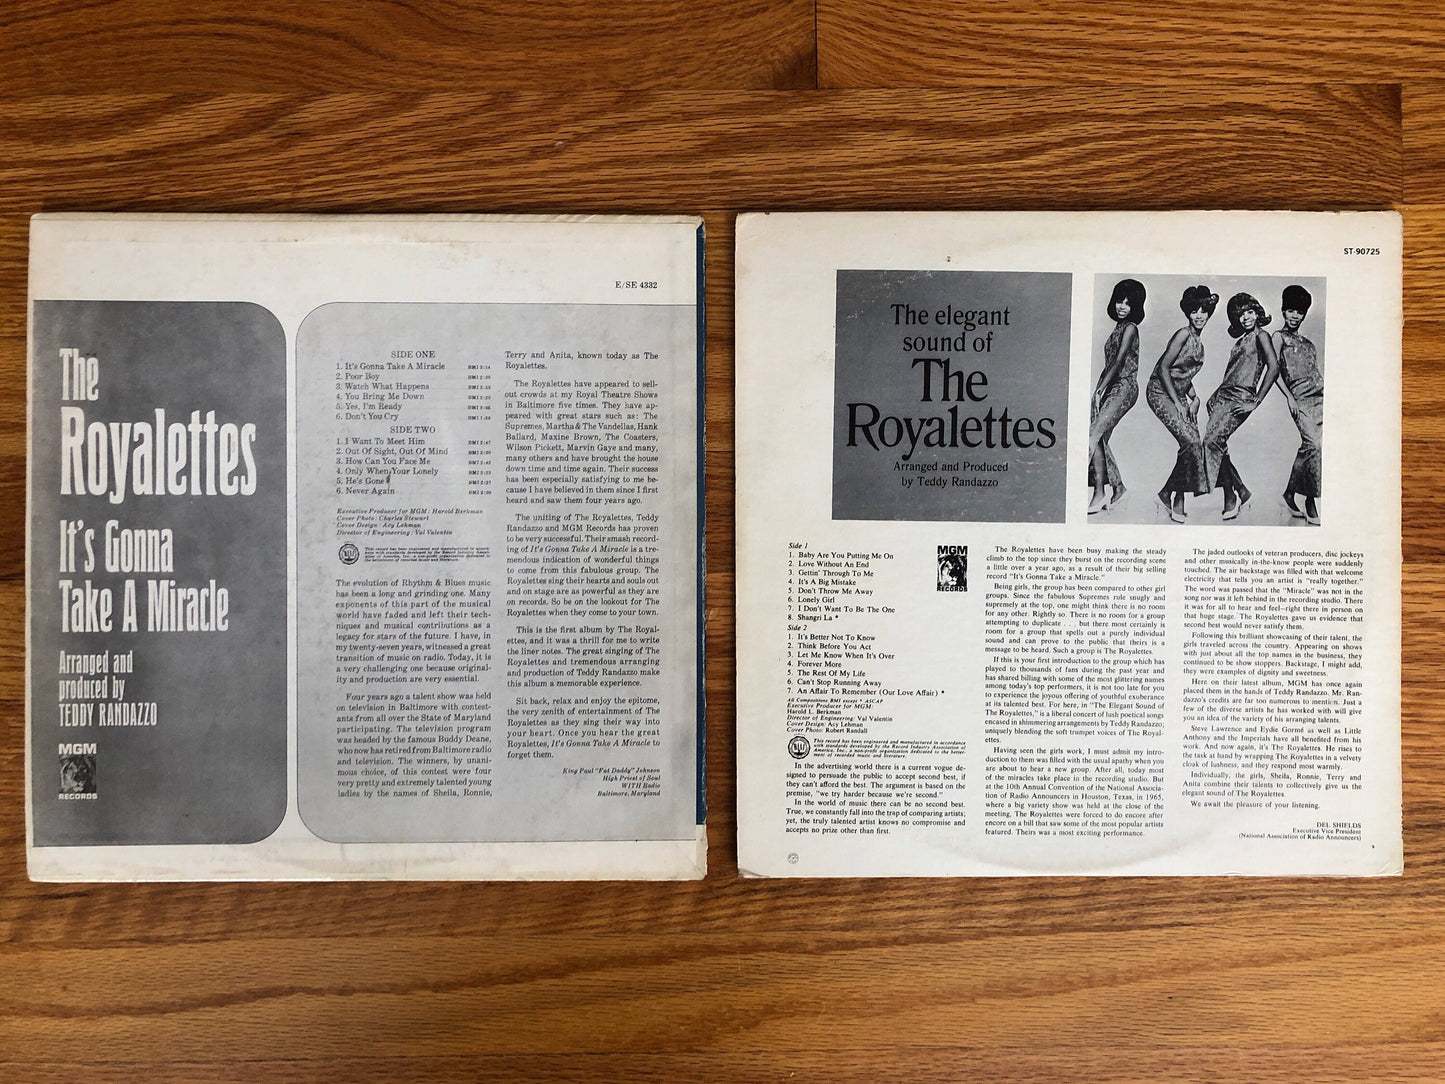 The Elegant Sound of The Royalettes by Teddy Randazzo Vintage Vinyl Records and  It's Gonna Take A Miracle Royalettes Record Bundle